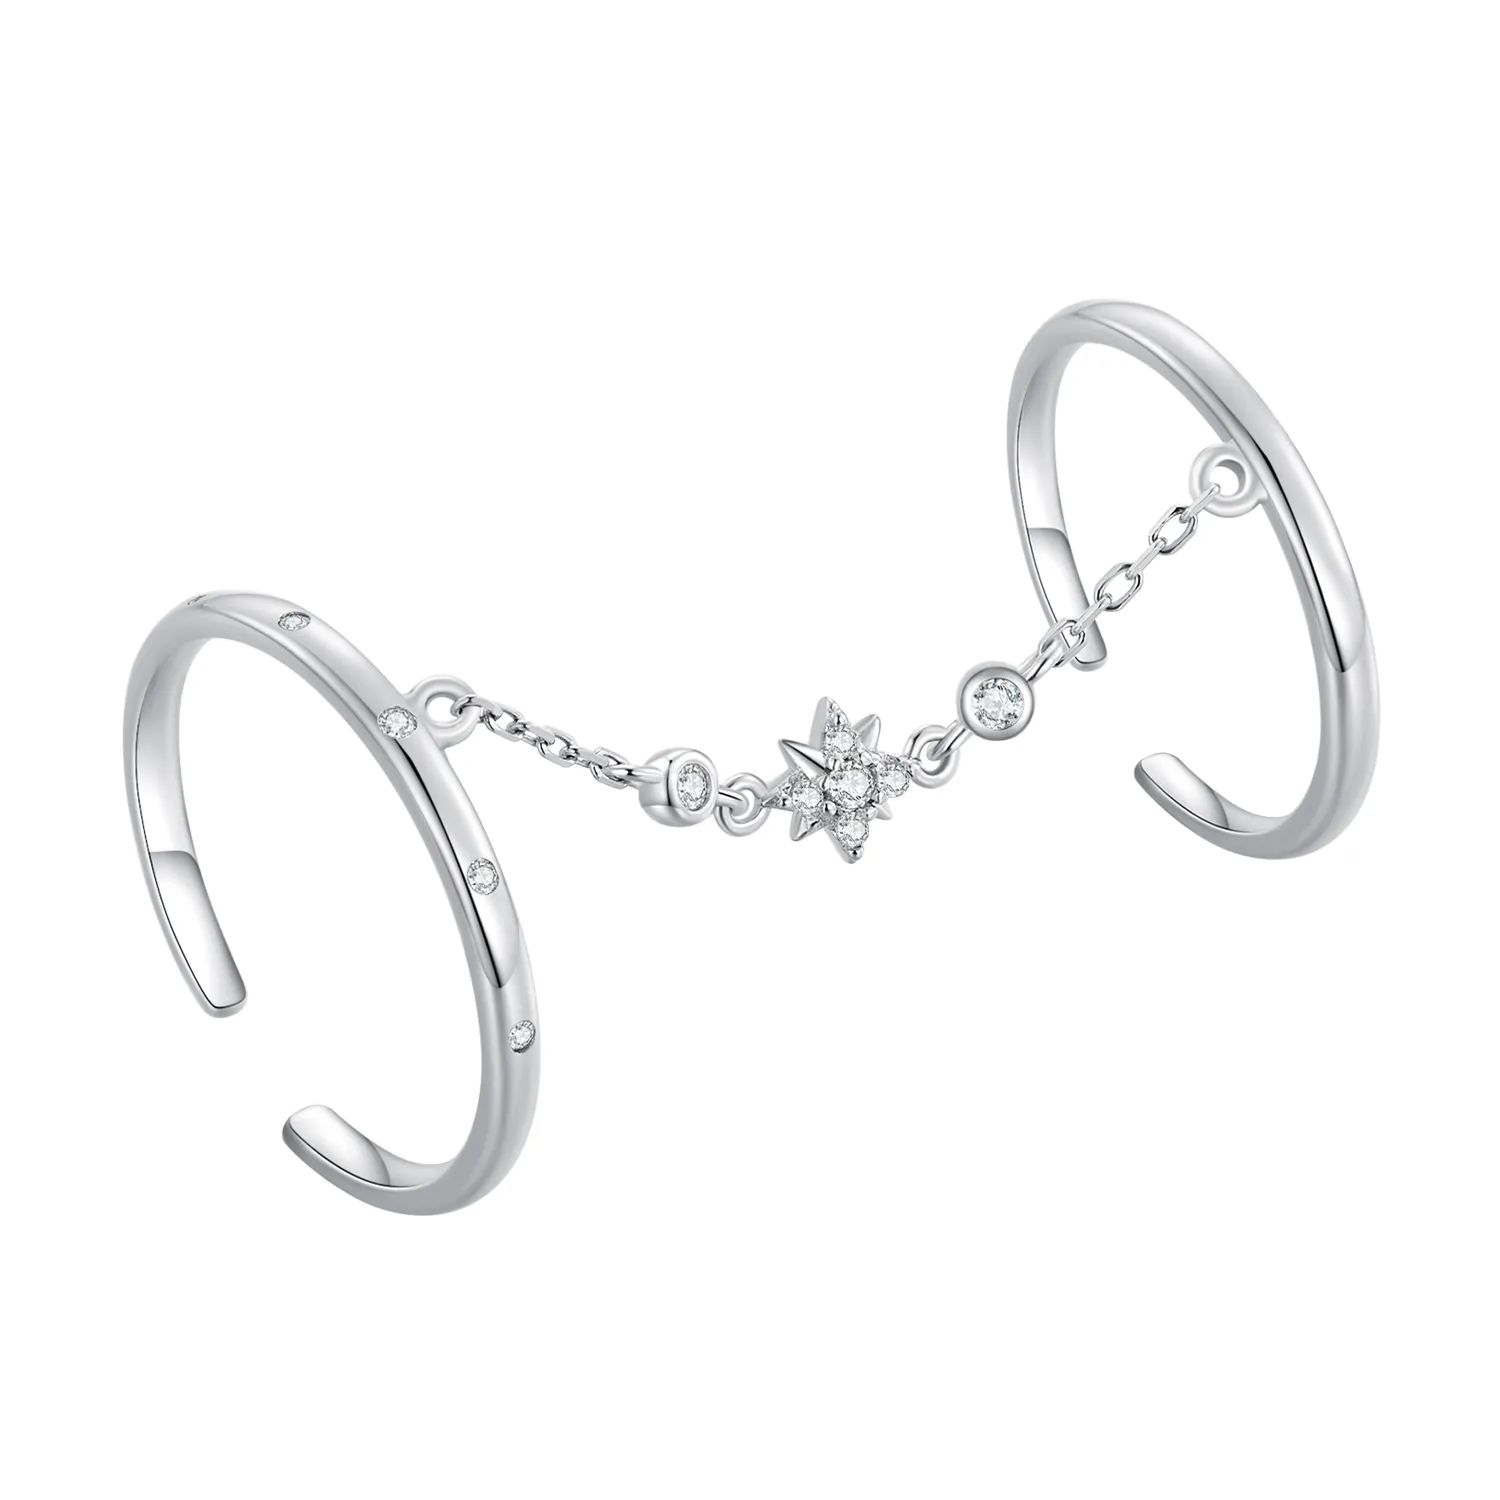 Pandora Style Chain Double Ring Open Ring - BSR405